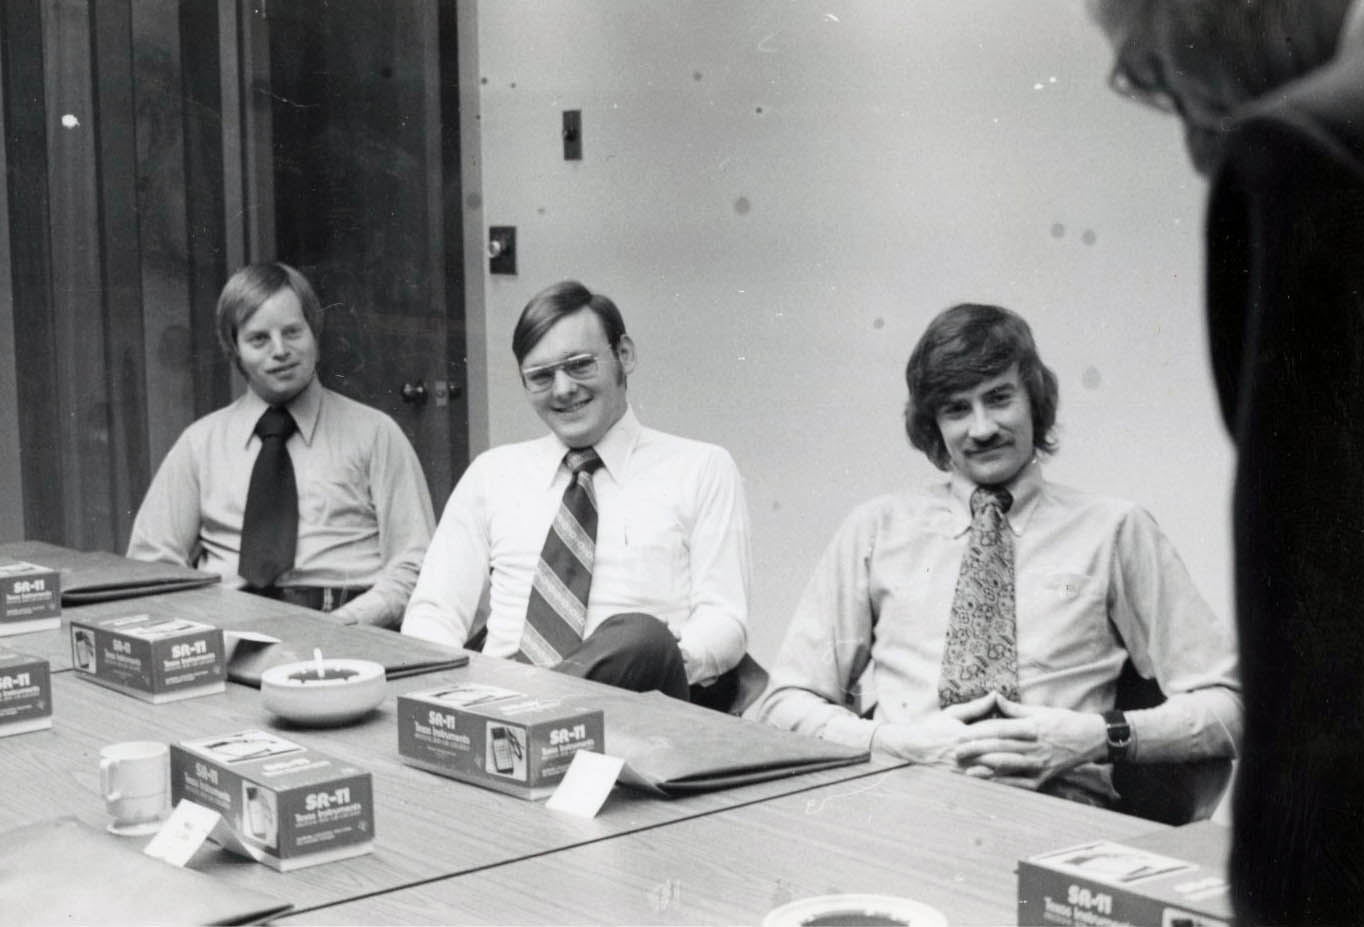 An archival photo from 1975 showing Kurt Polsley seated on the far left next to two other men in a sales meeting.